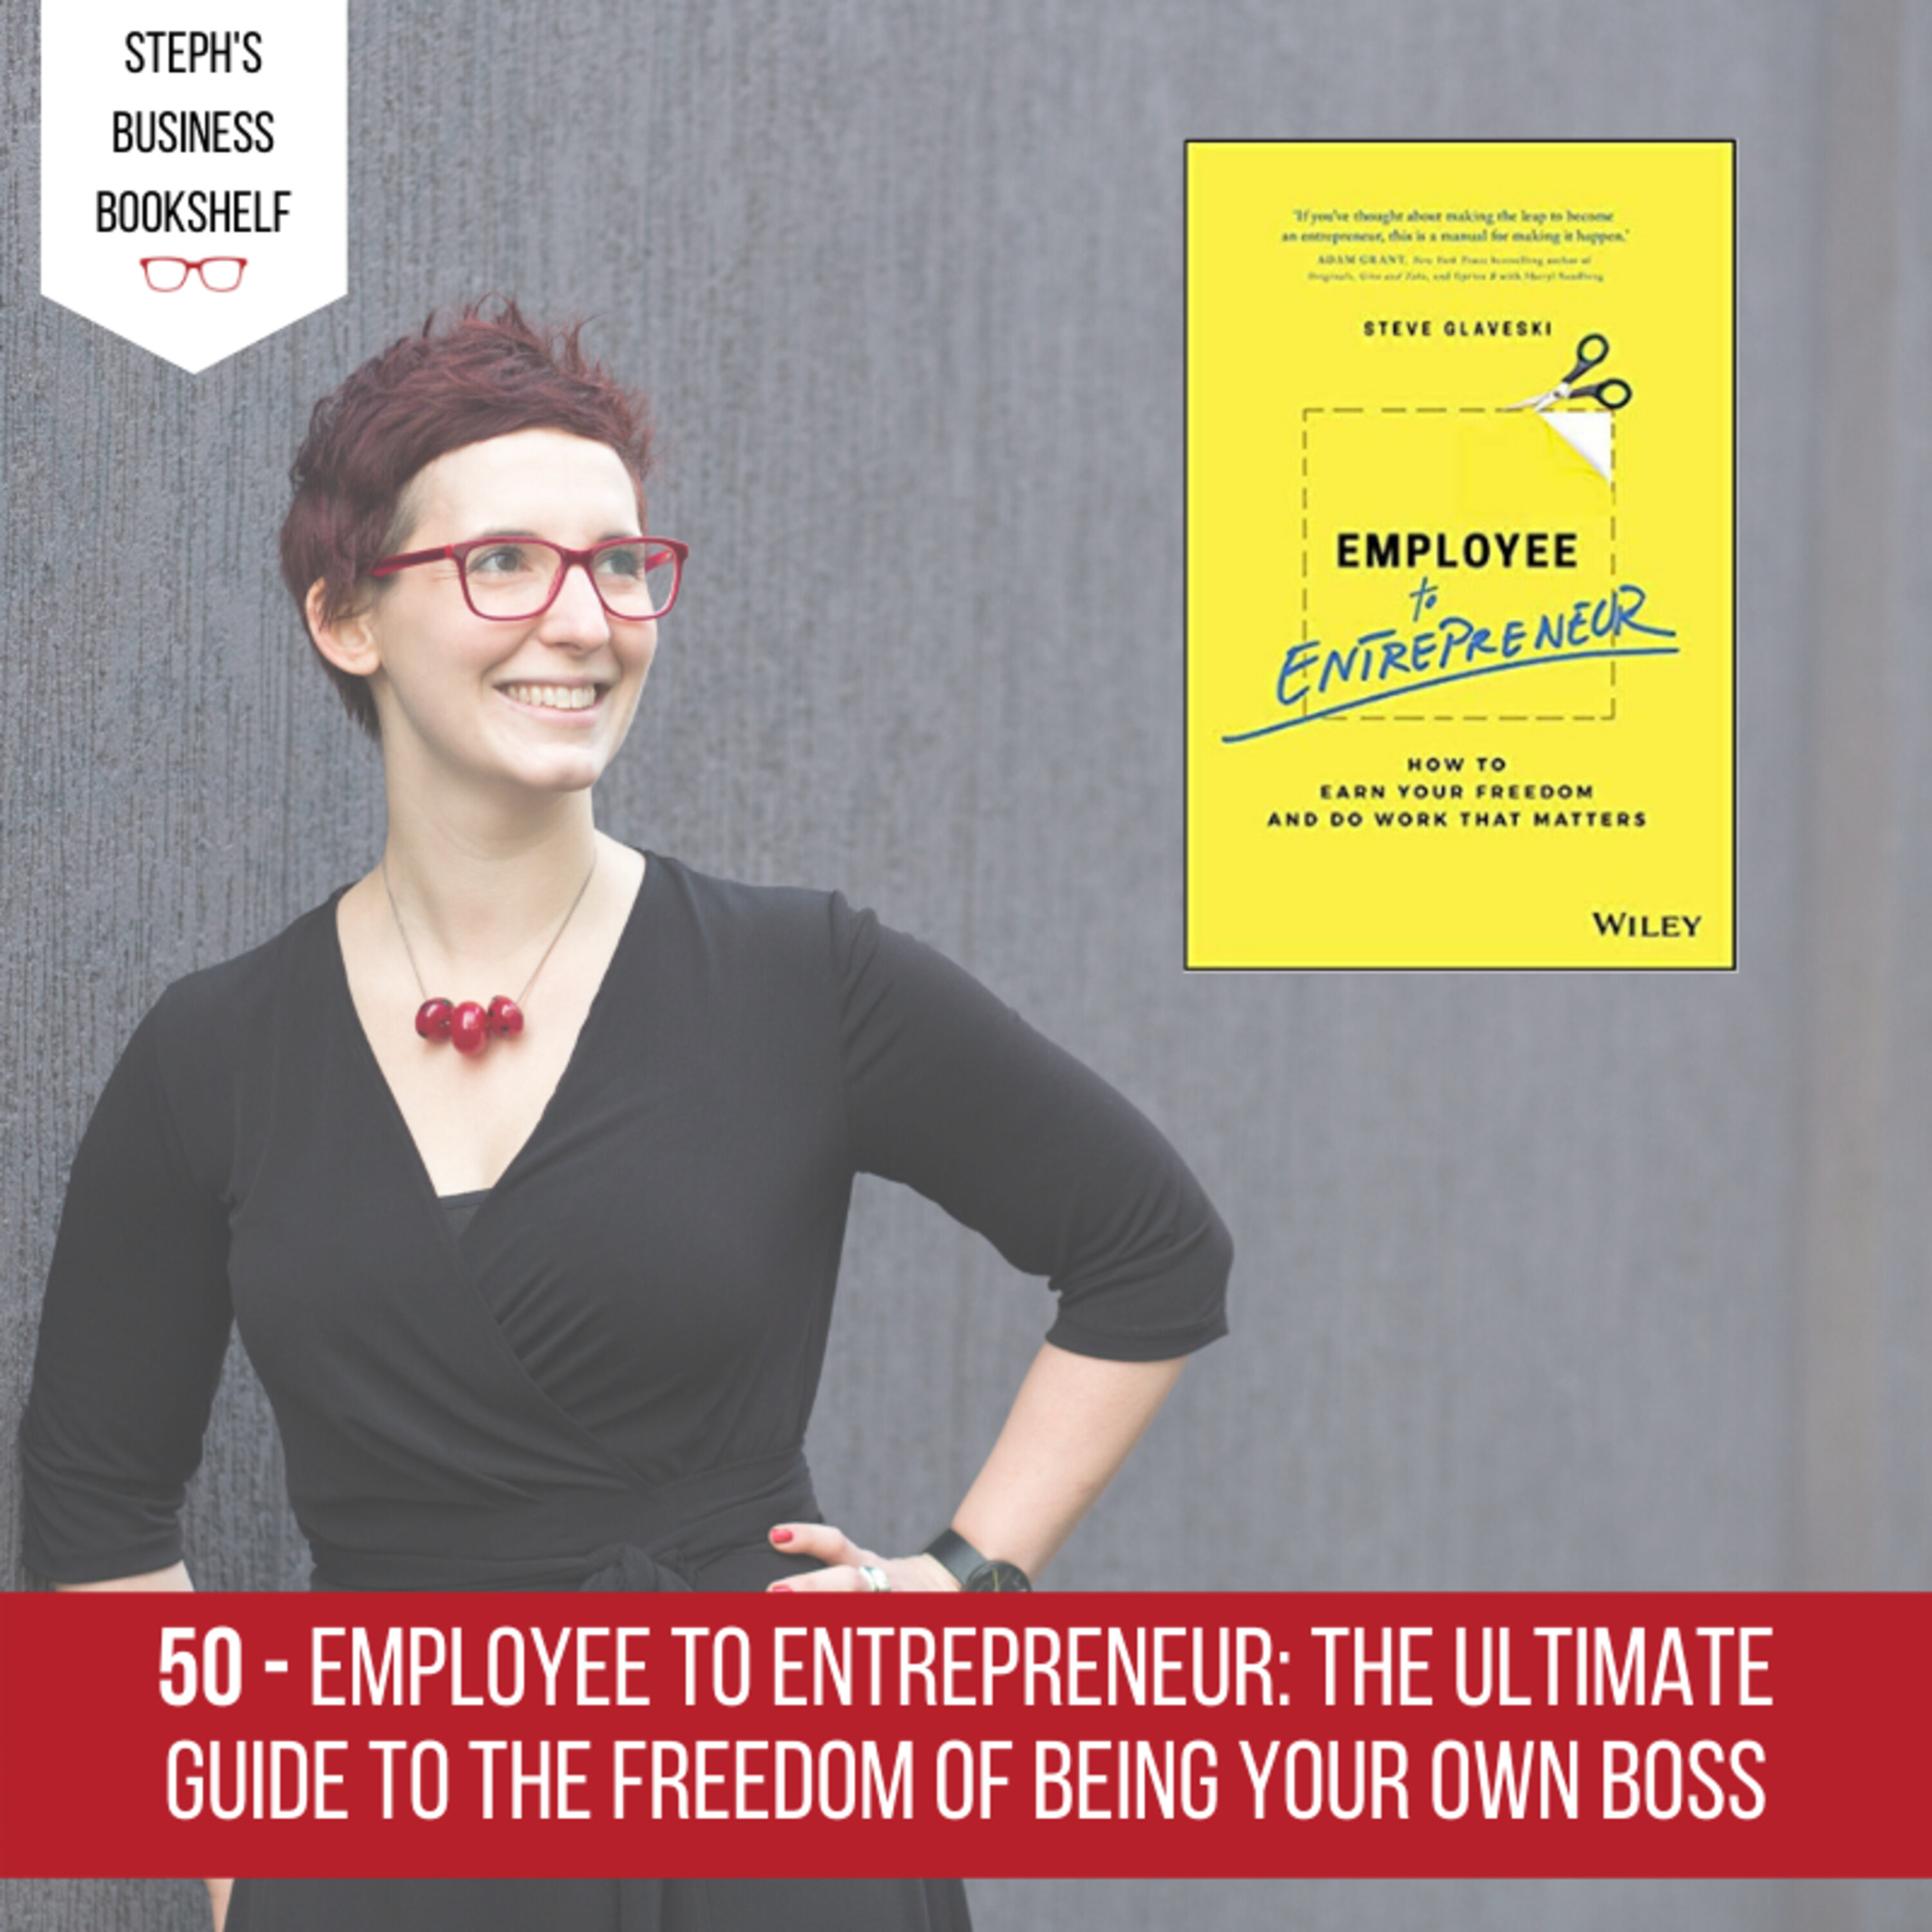 Employee to Entrepreneur by Steve Glaveski: The ultimate guide to the freedom of being your own boss